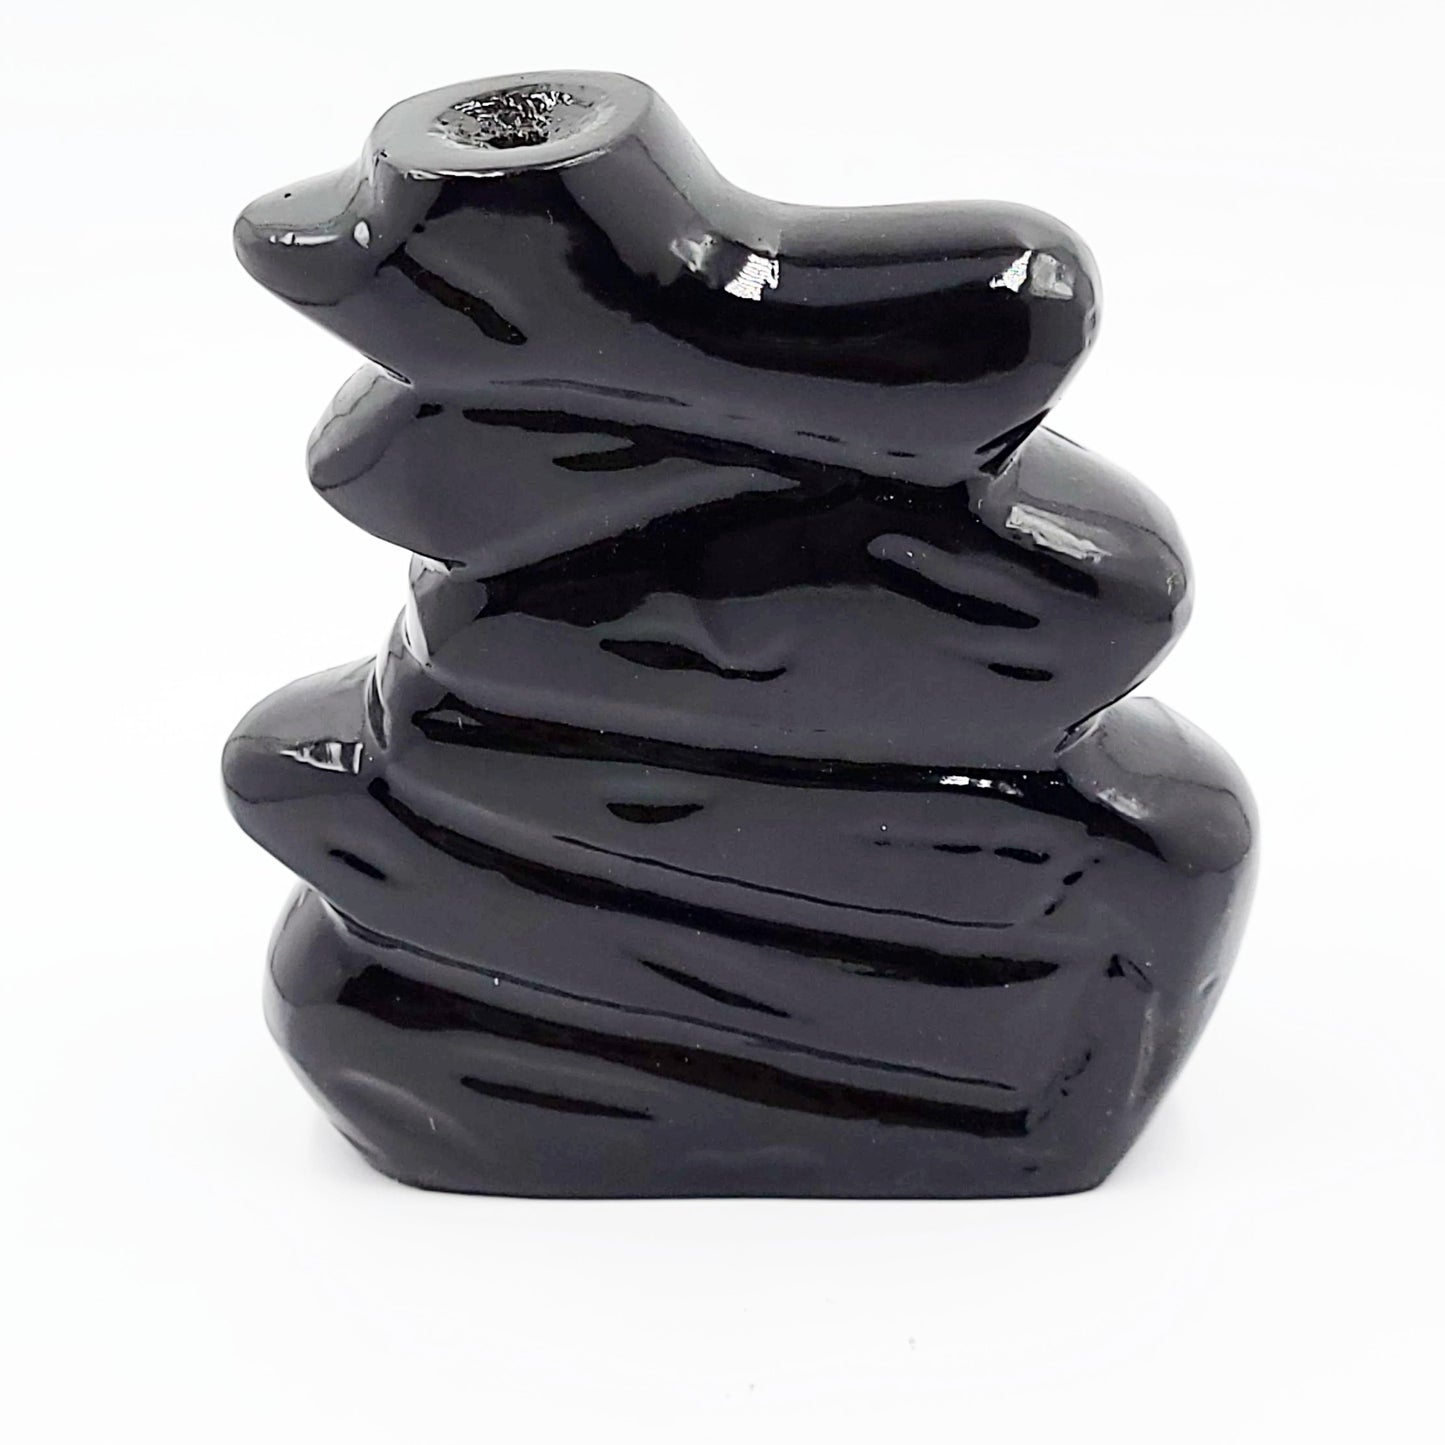 Water Fall Back Flow Cone Burner 4.5" x 4.5" - Elevated Metaphysical